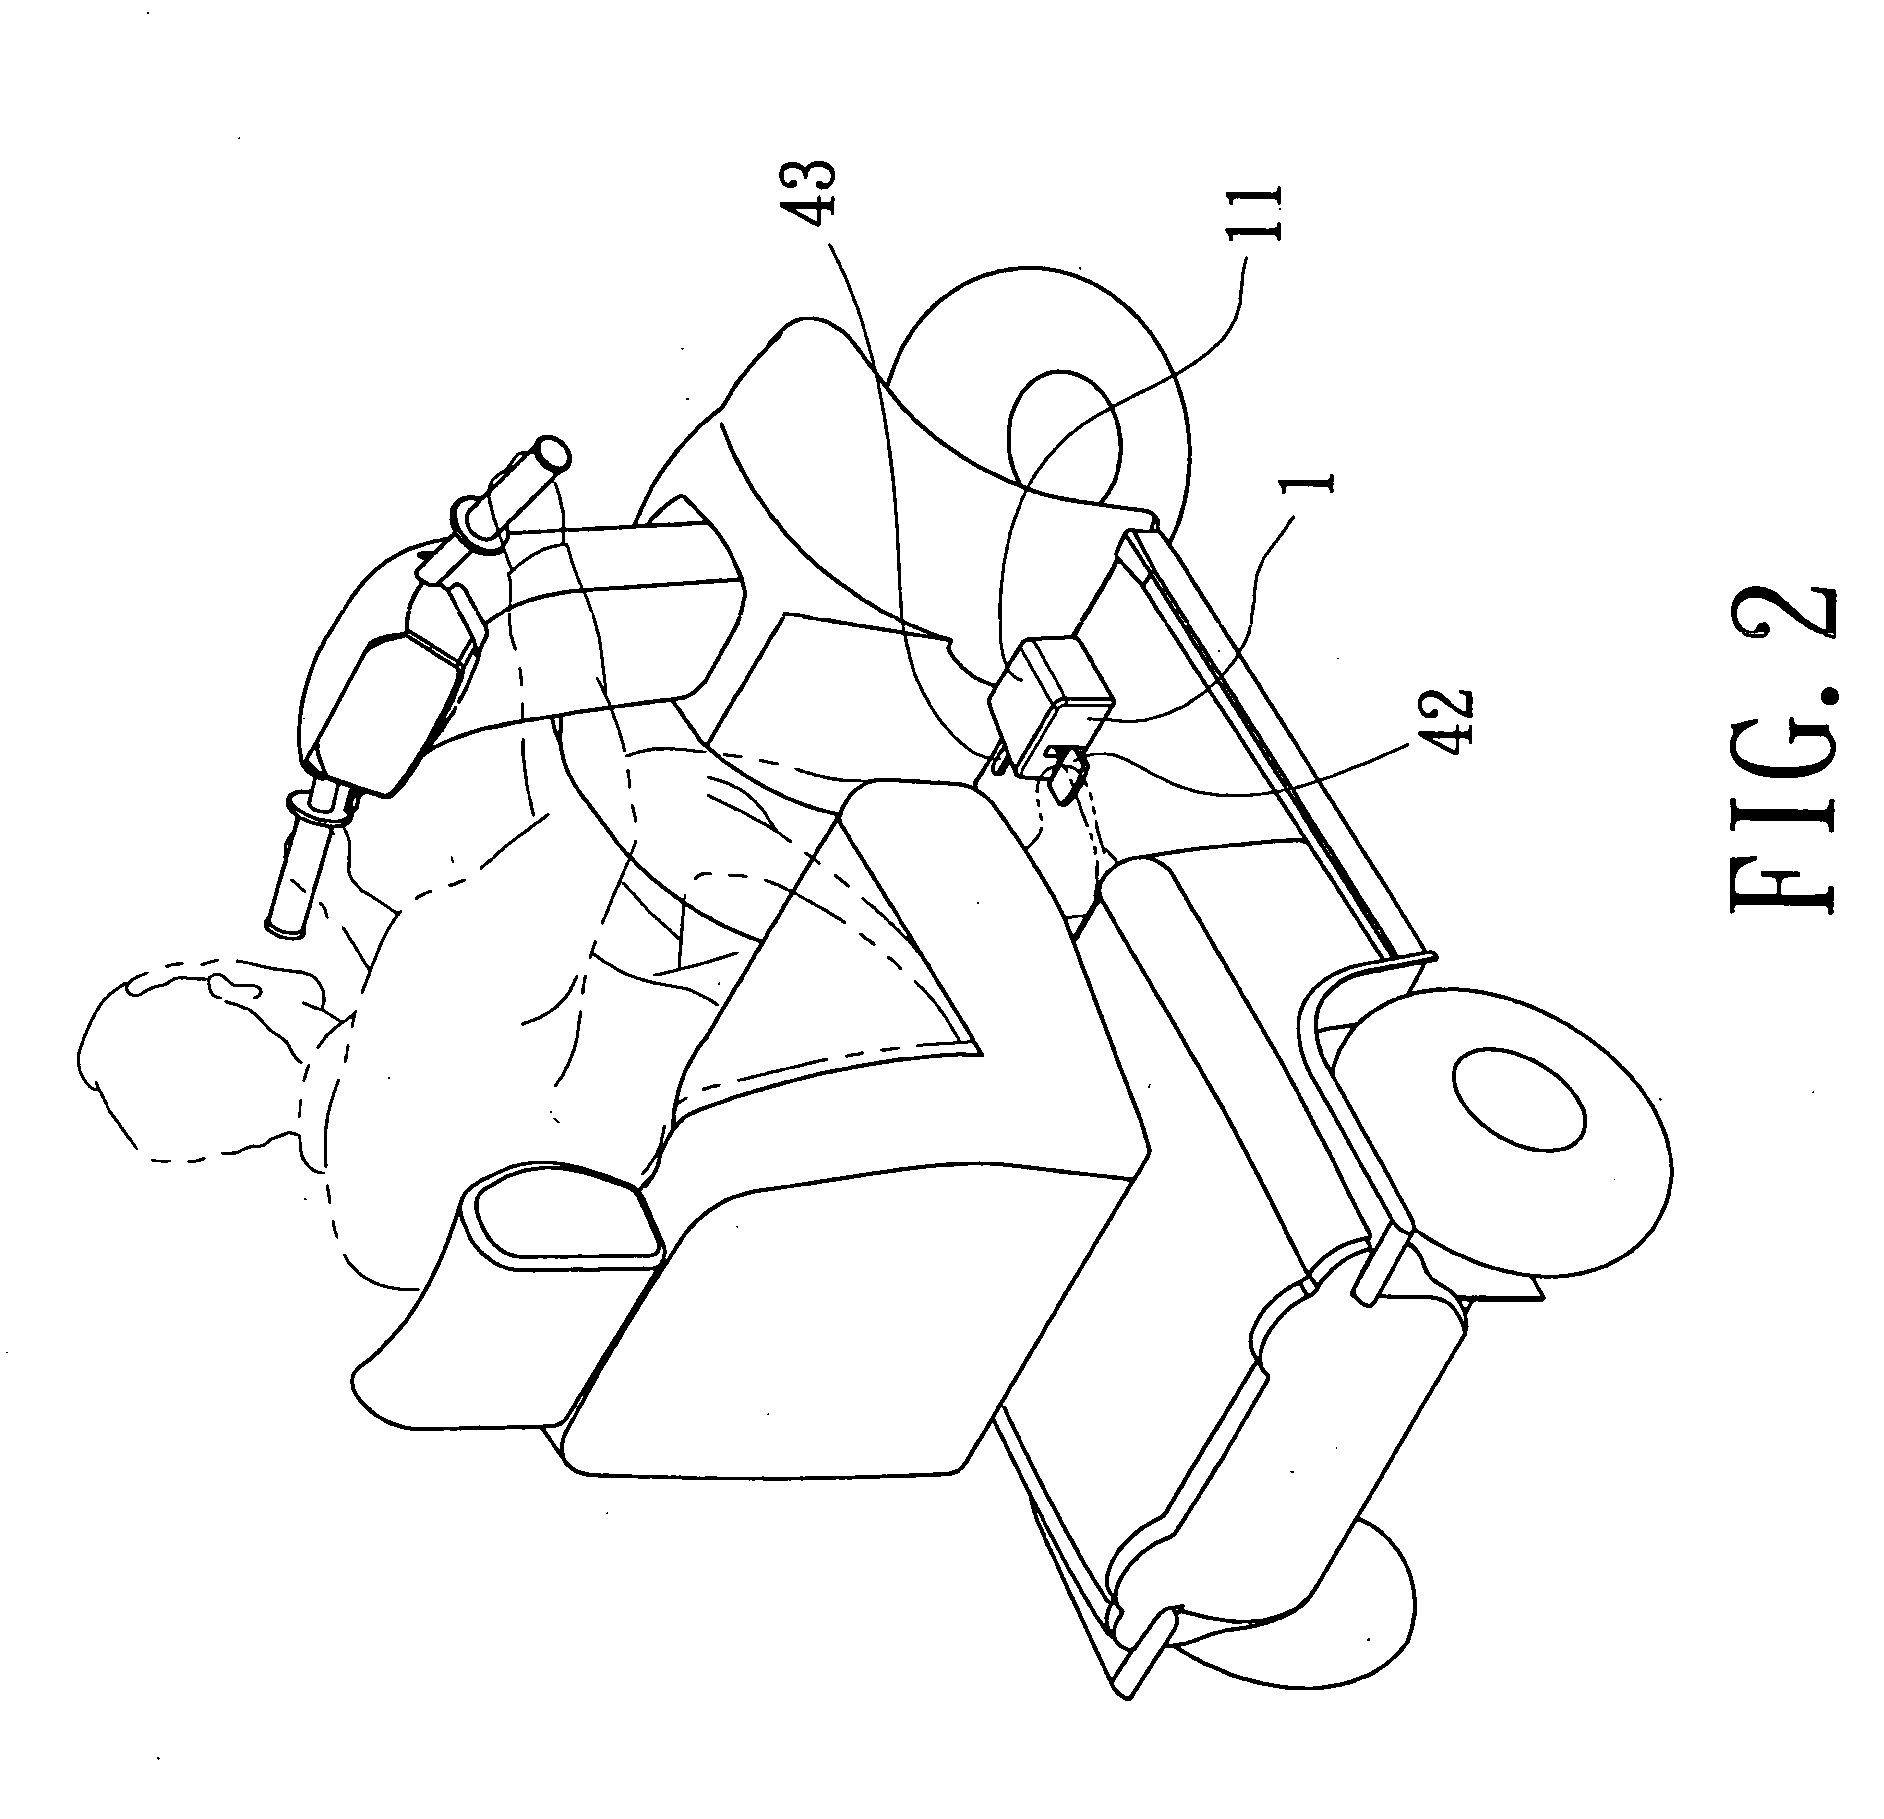 Mobility pedal structure for electric scooter